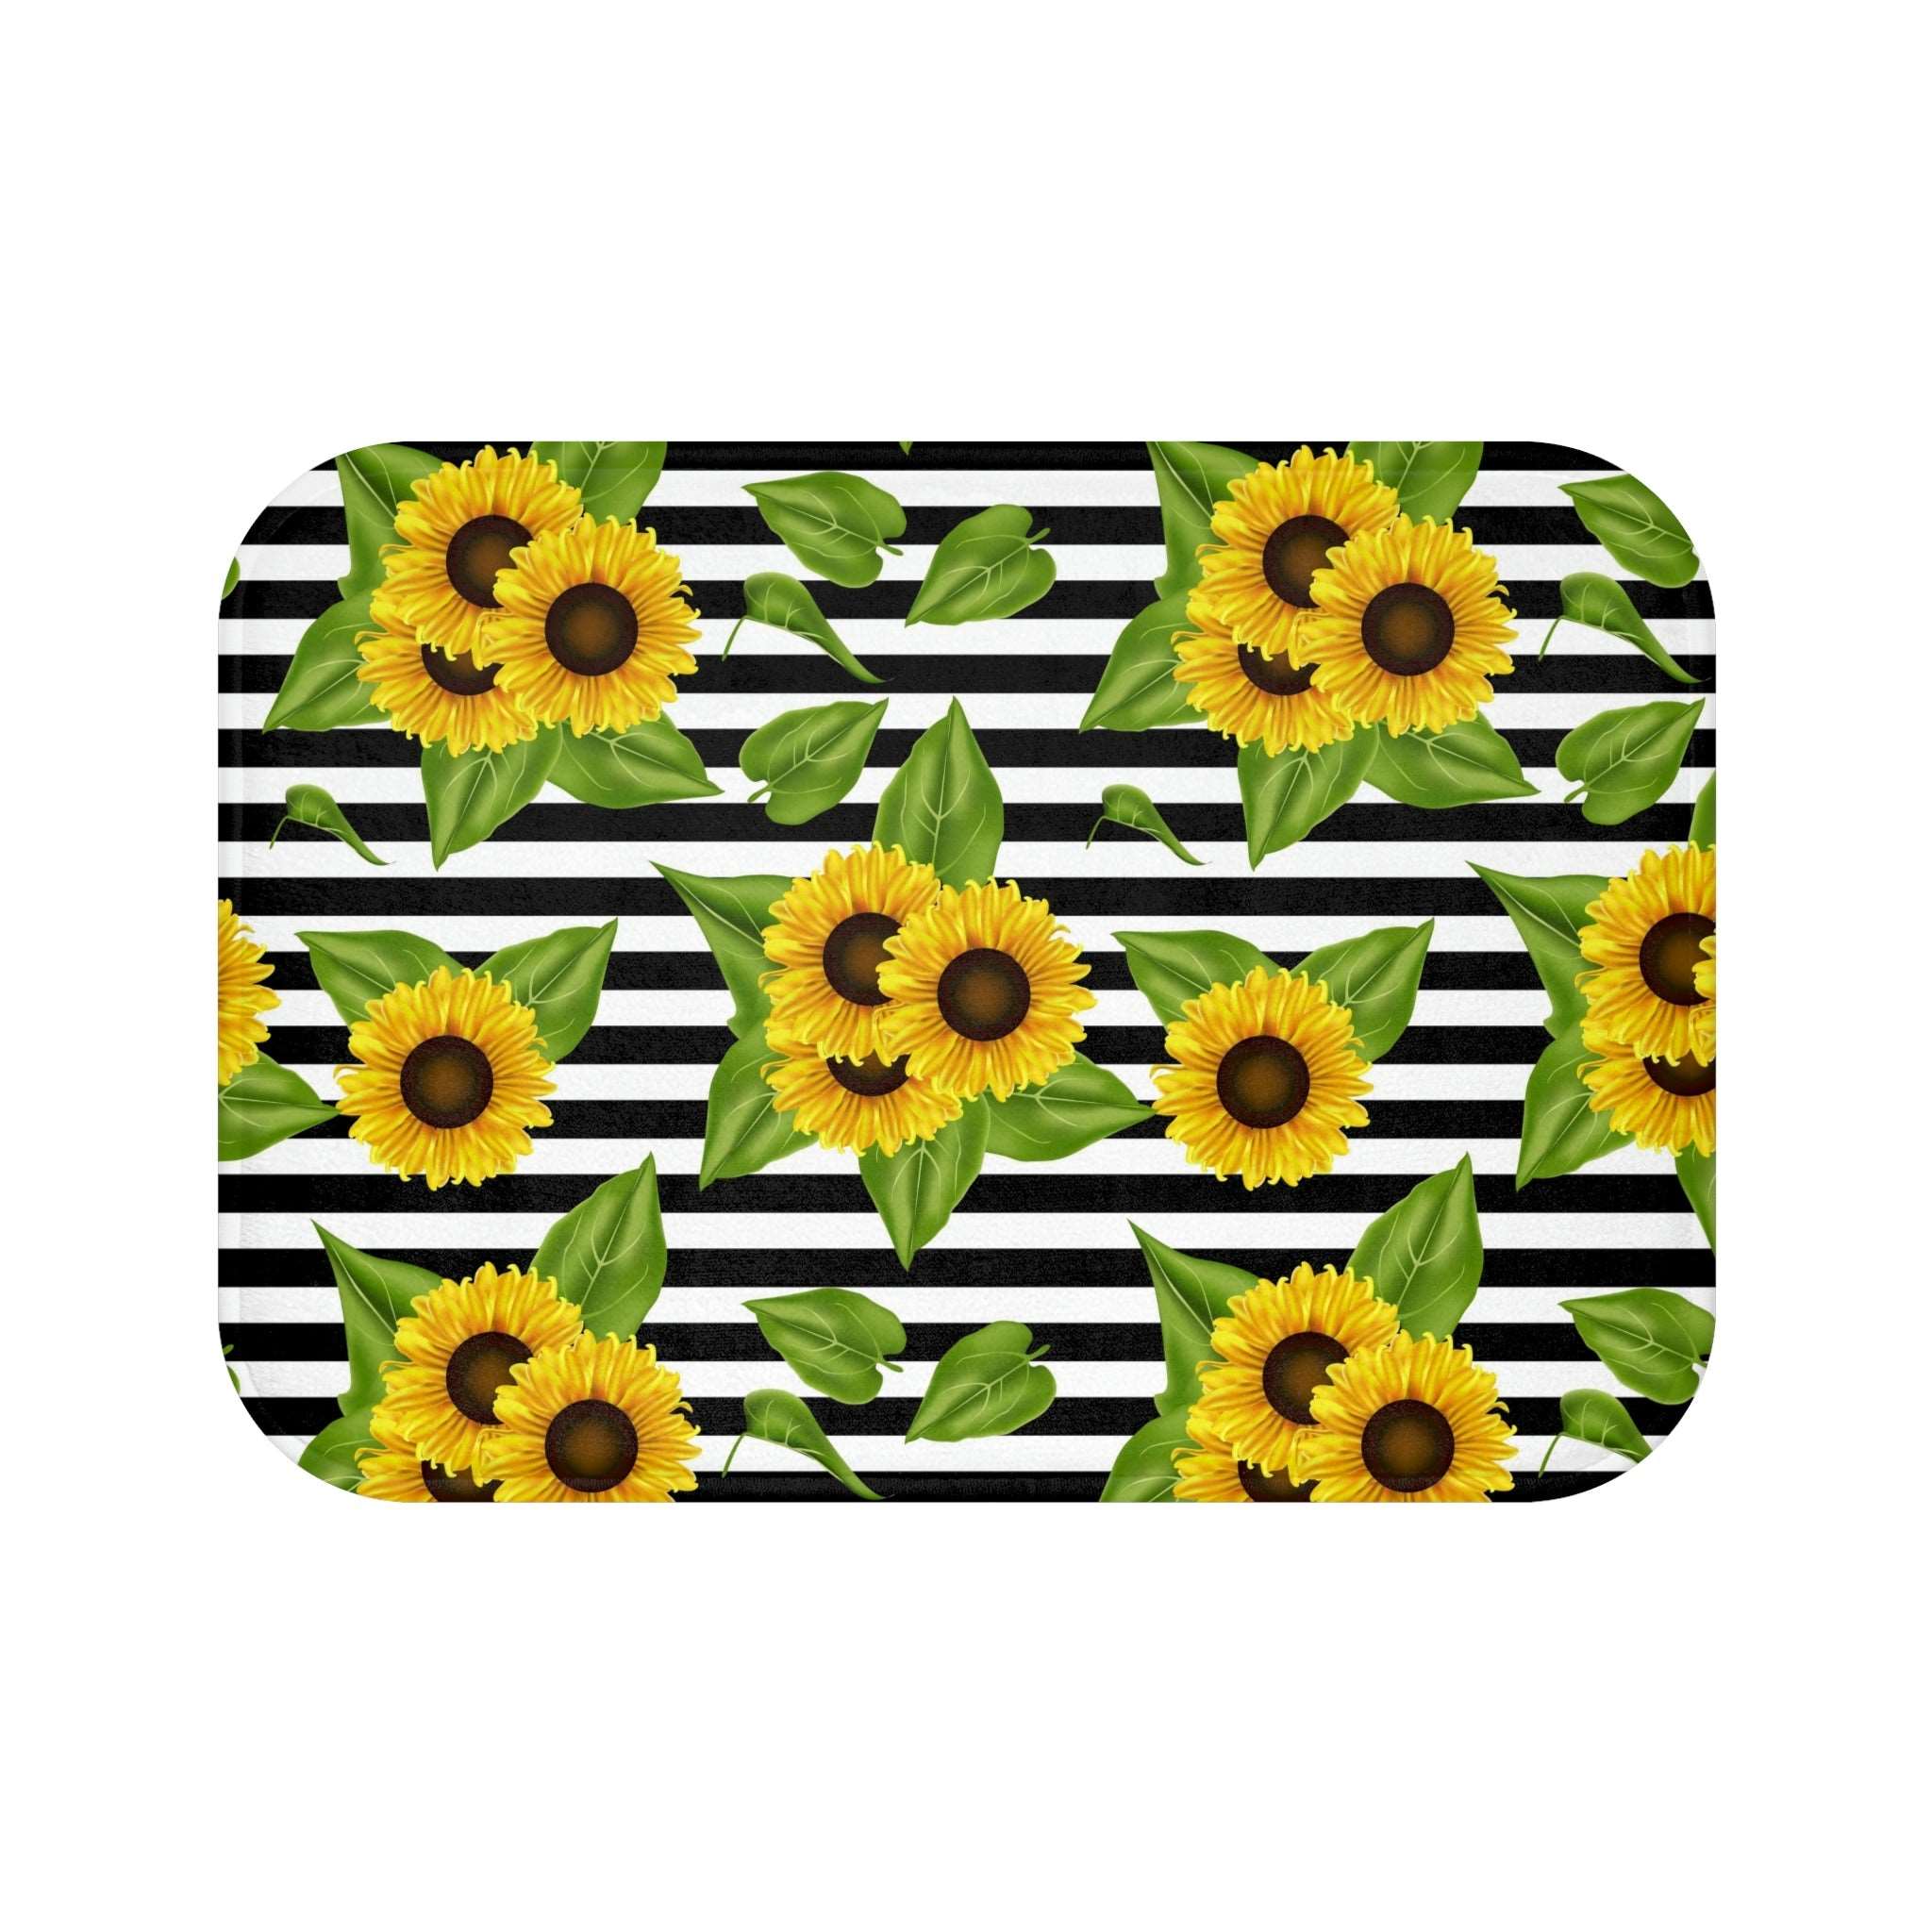 Sunny Splendor: Bath Mat Sunflowers Bring Cheer to Black and White Spaces Home-clothes-jewelry